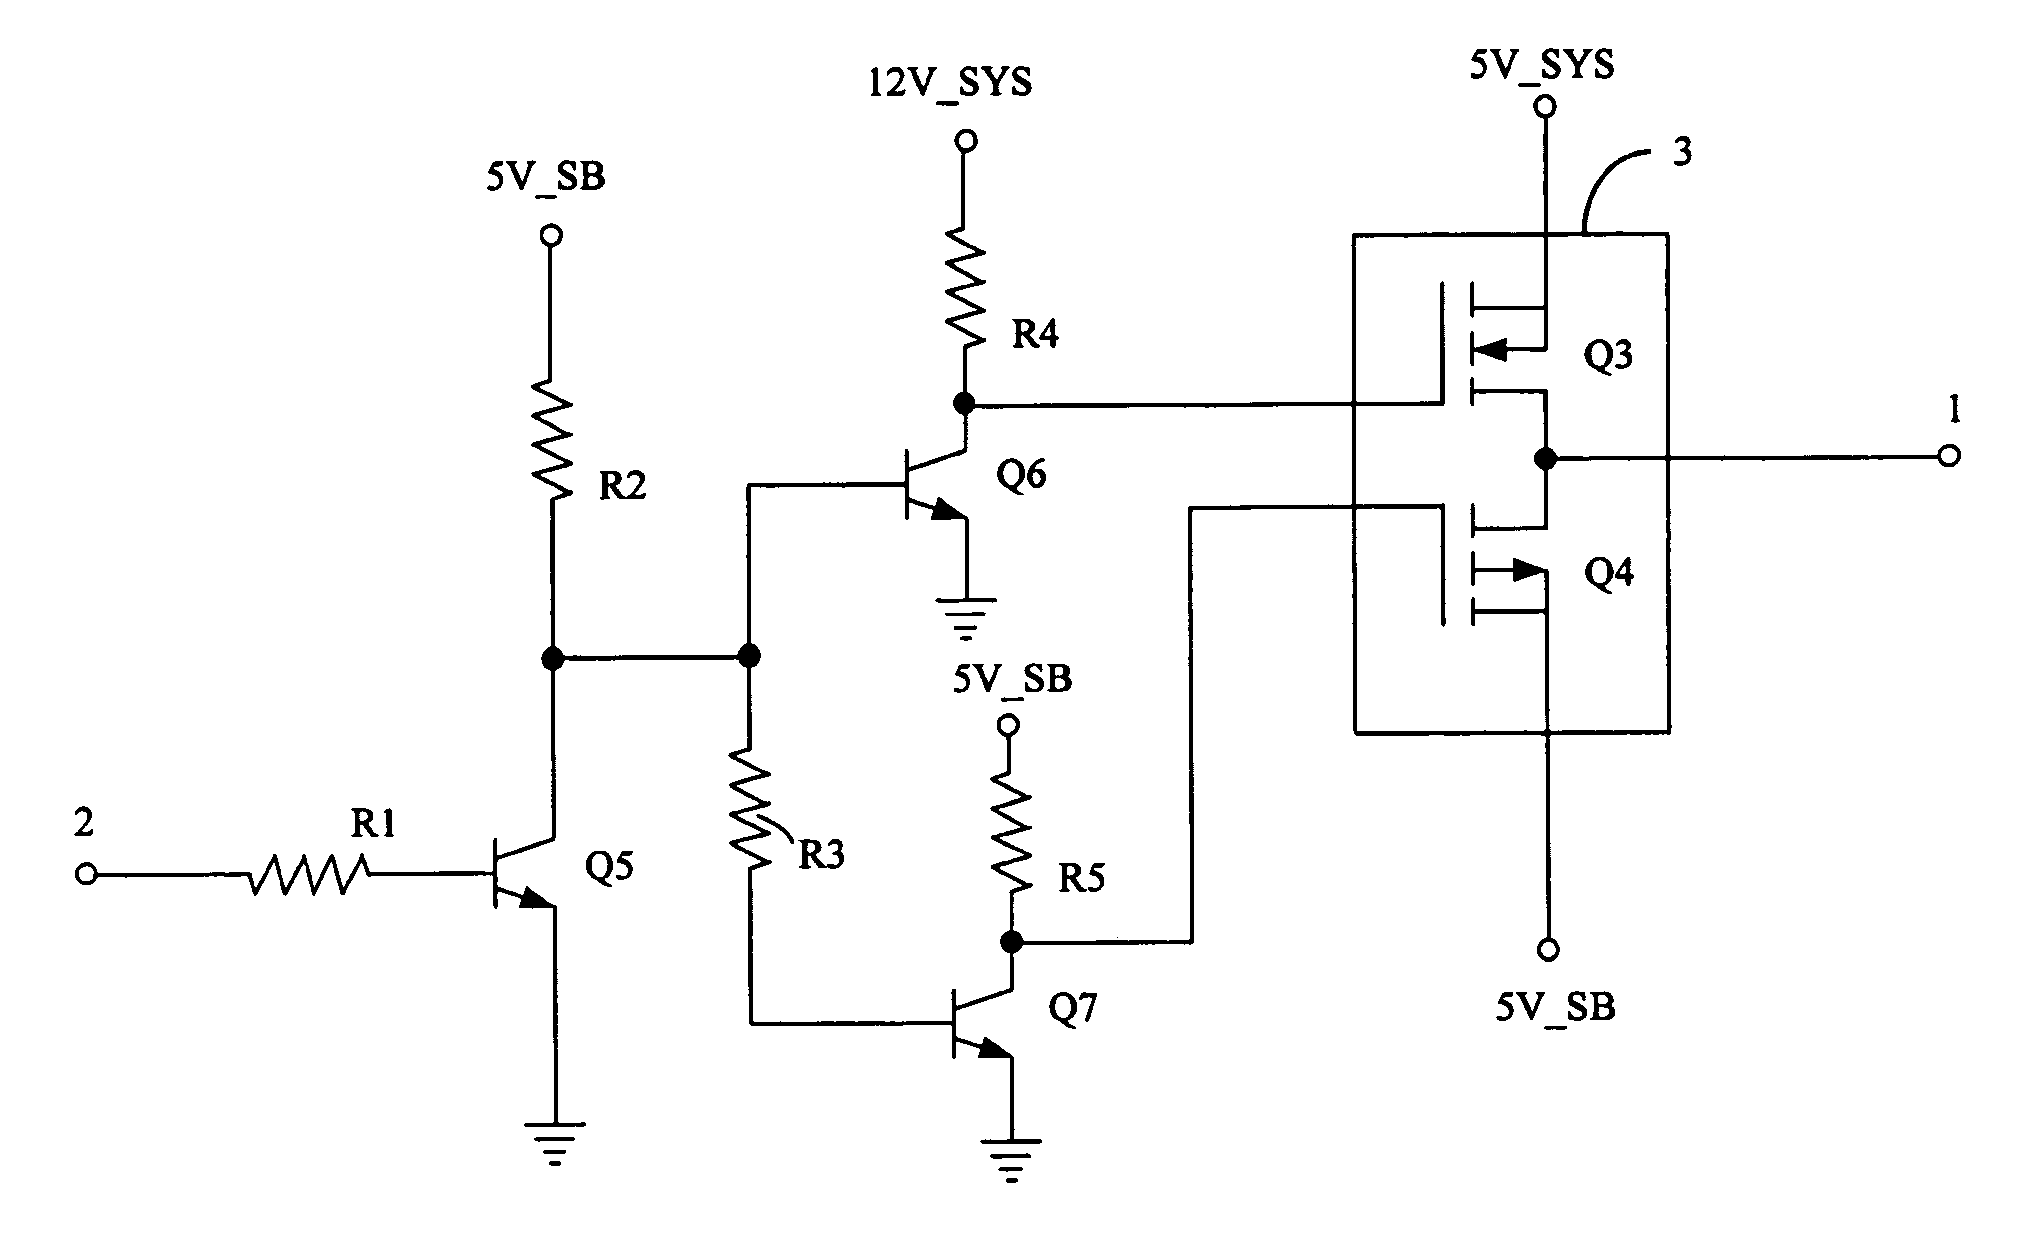 Supply voltage switching circuit